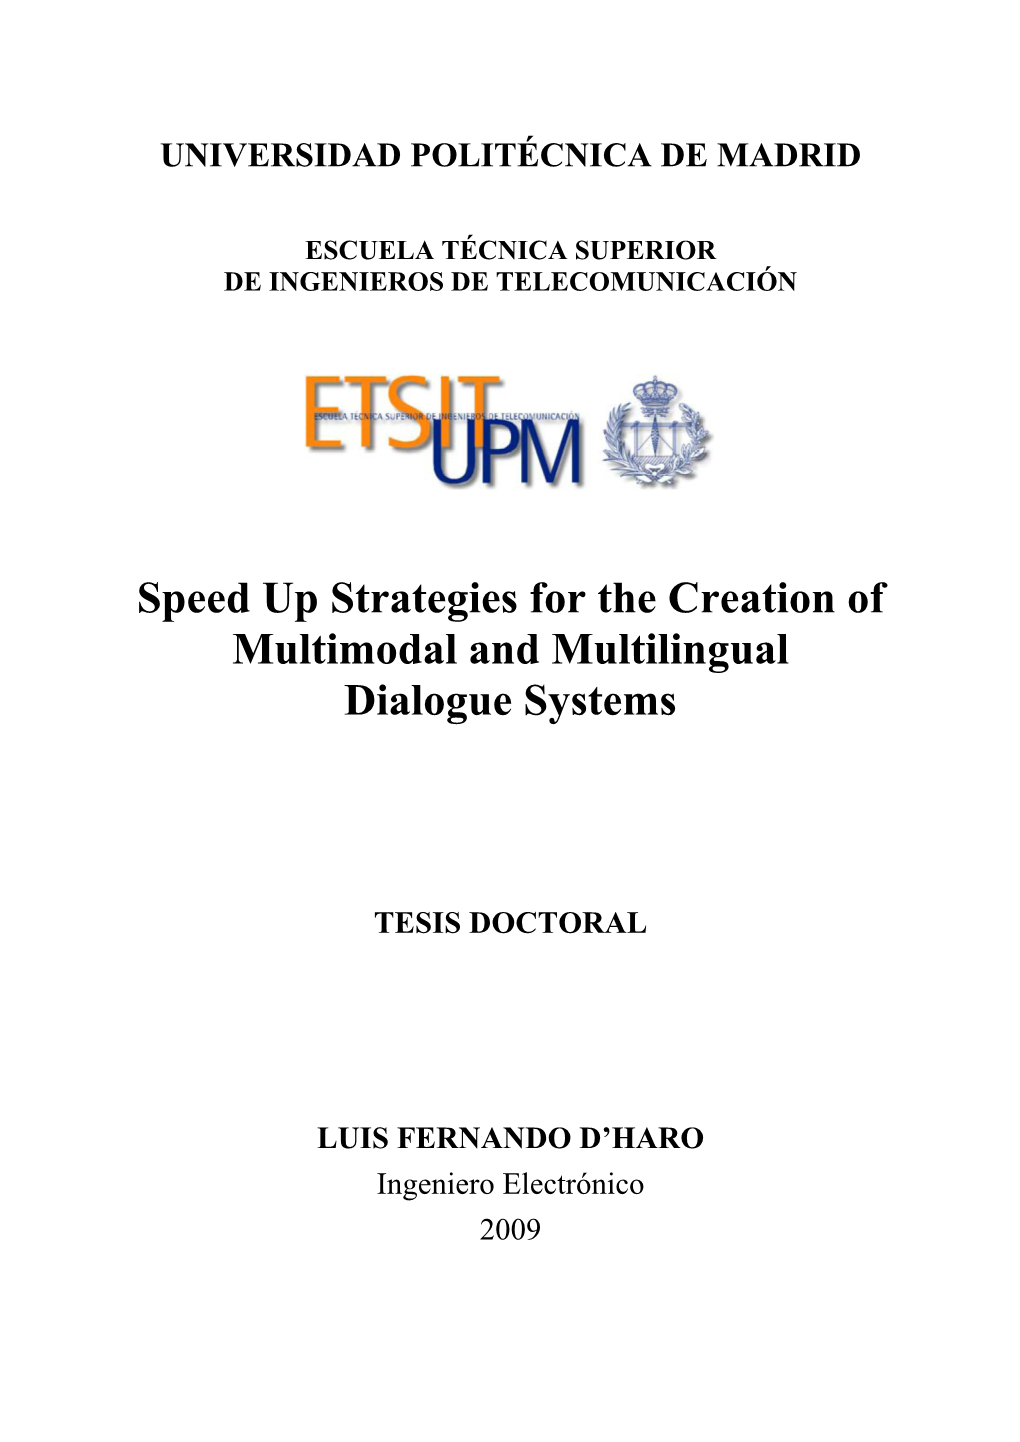 Speed up Strategies for the Creation of Multimodal and Multilingual Dialogue Systems